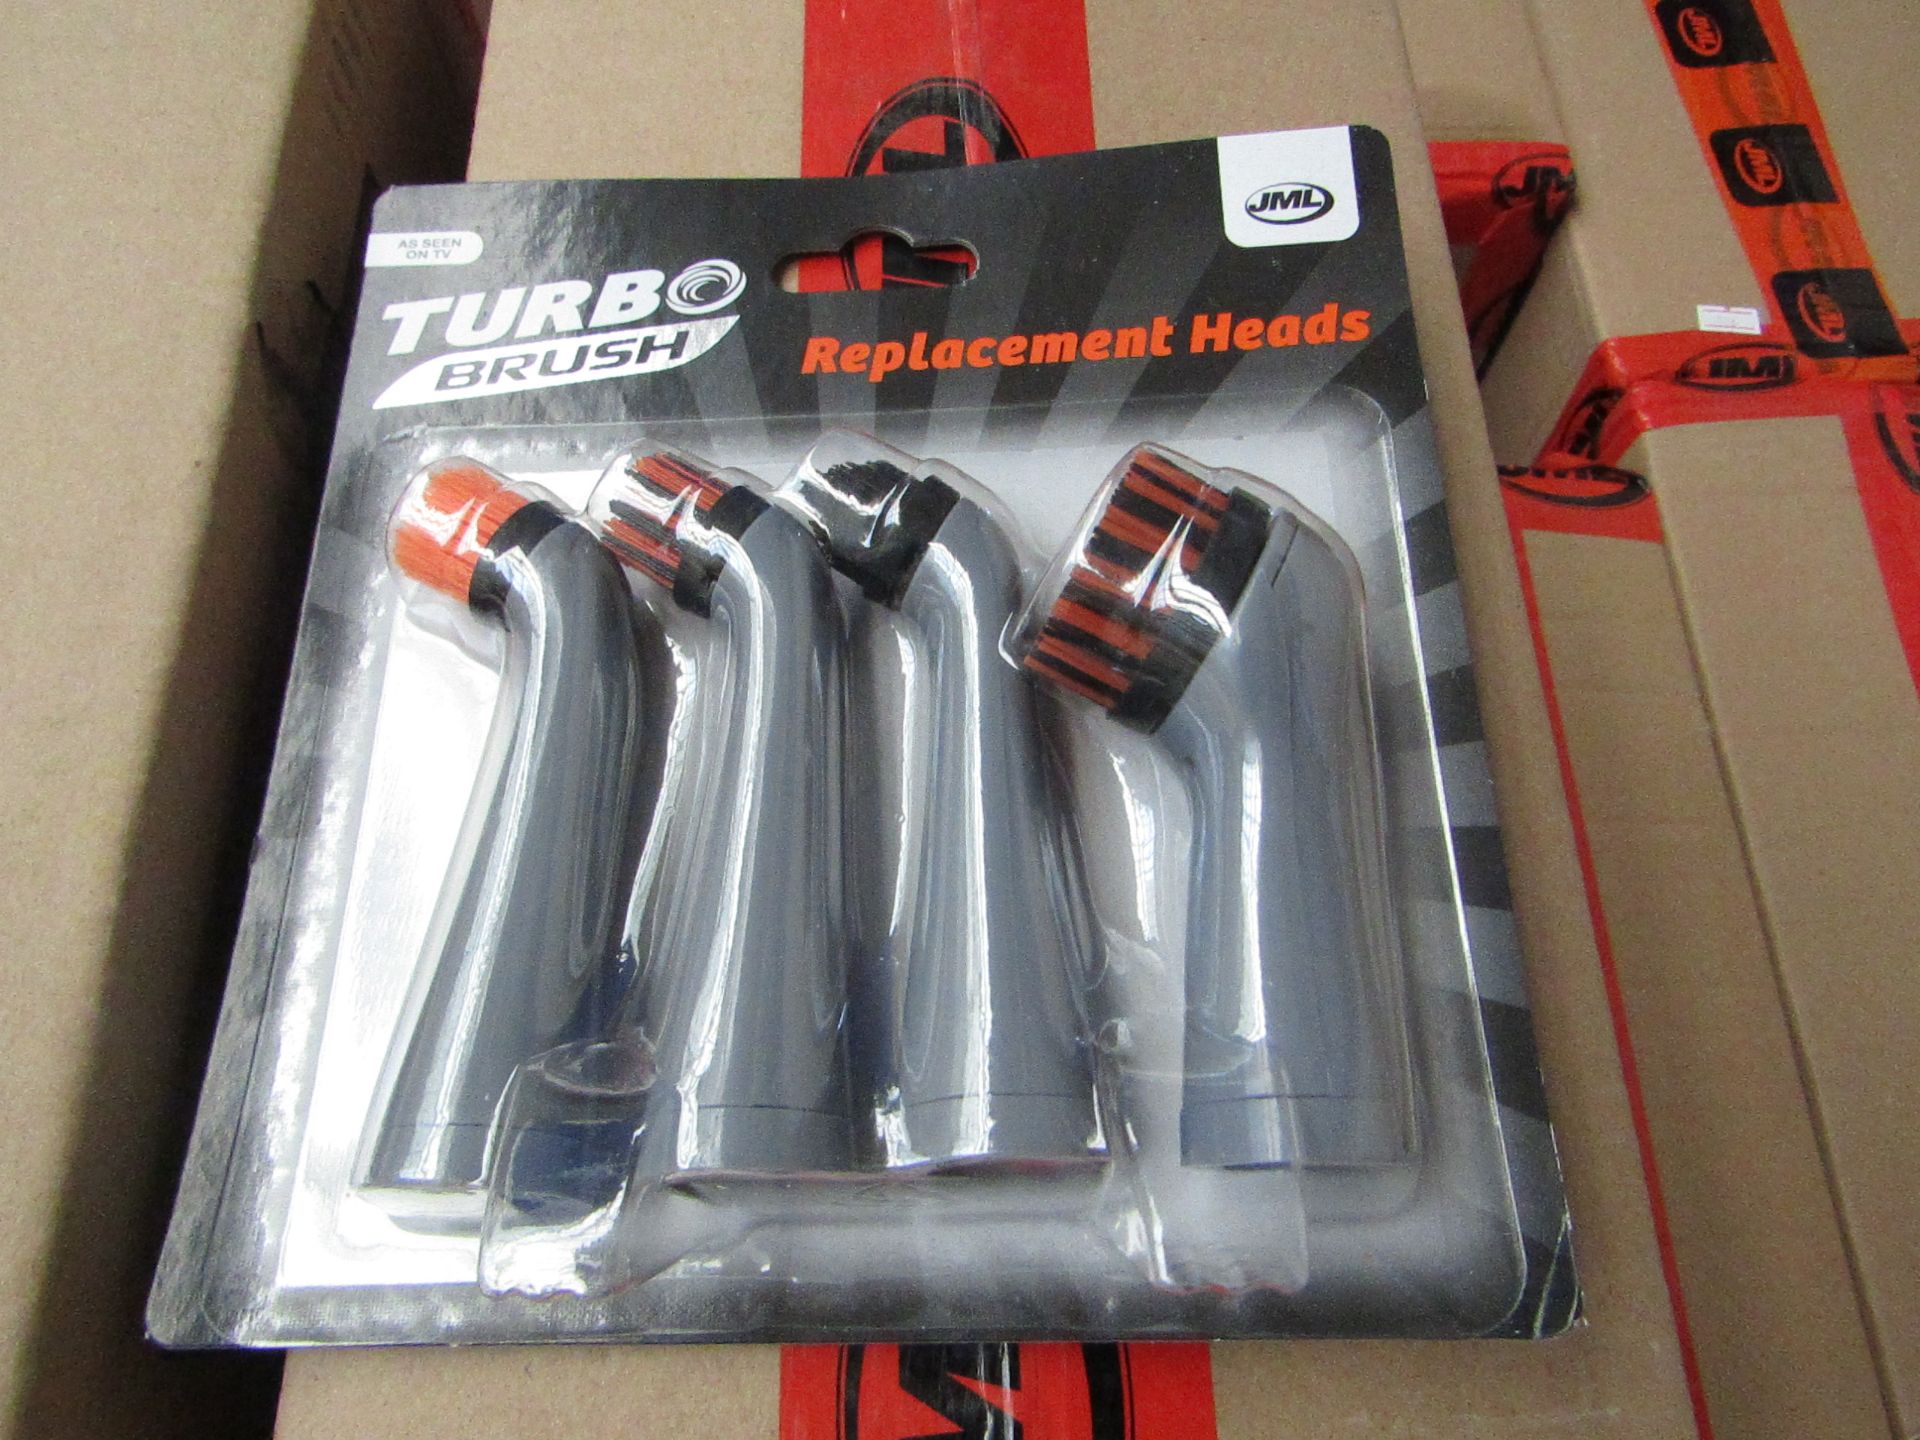 5 X Boxes of 12  JML Turbo brush replacement heads each set contains 4 heads ( thats 240 replacement - Image 2 of 2